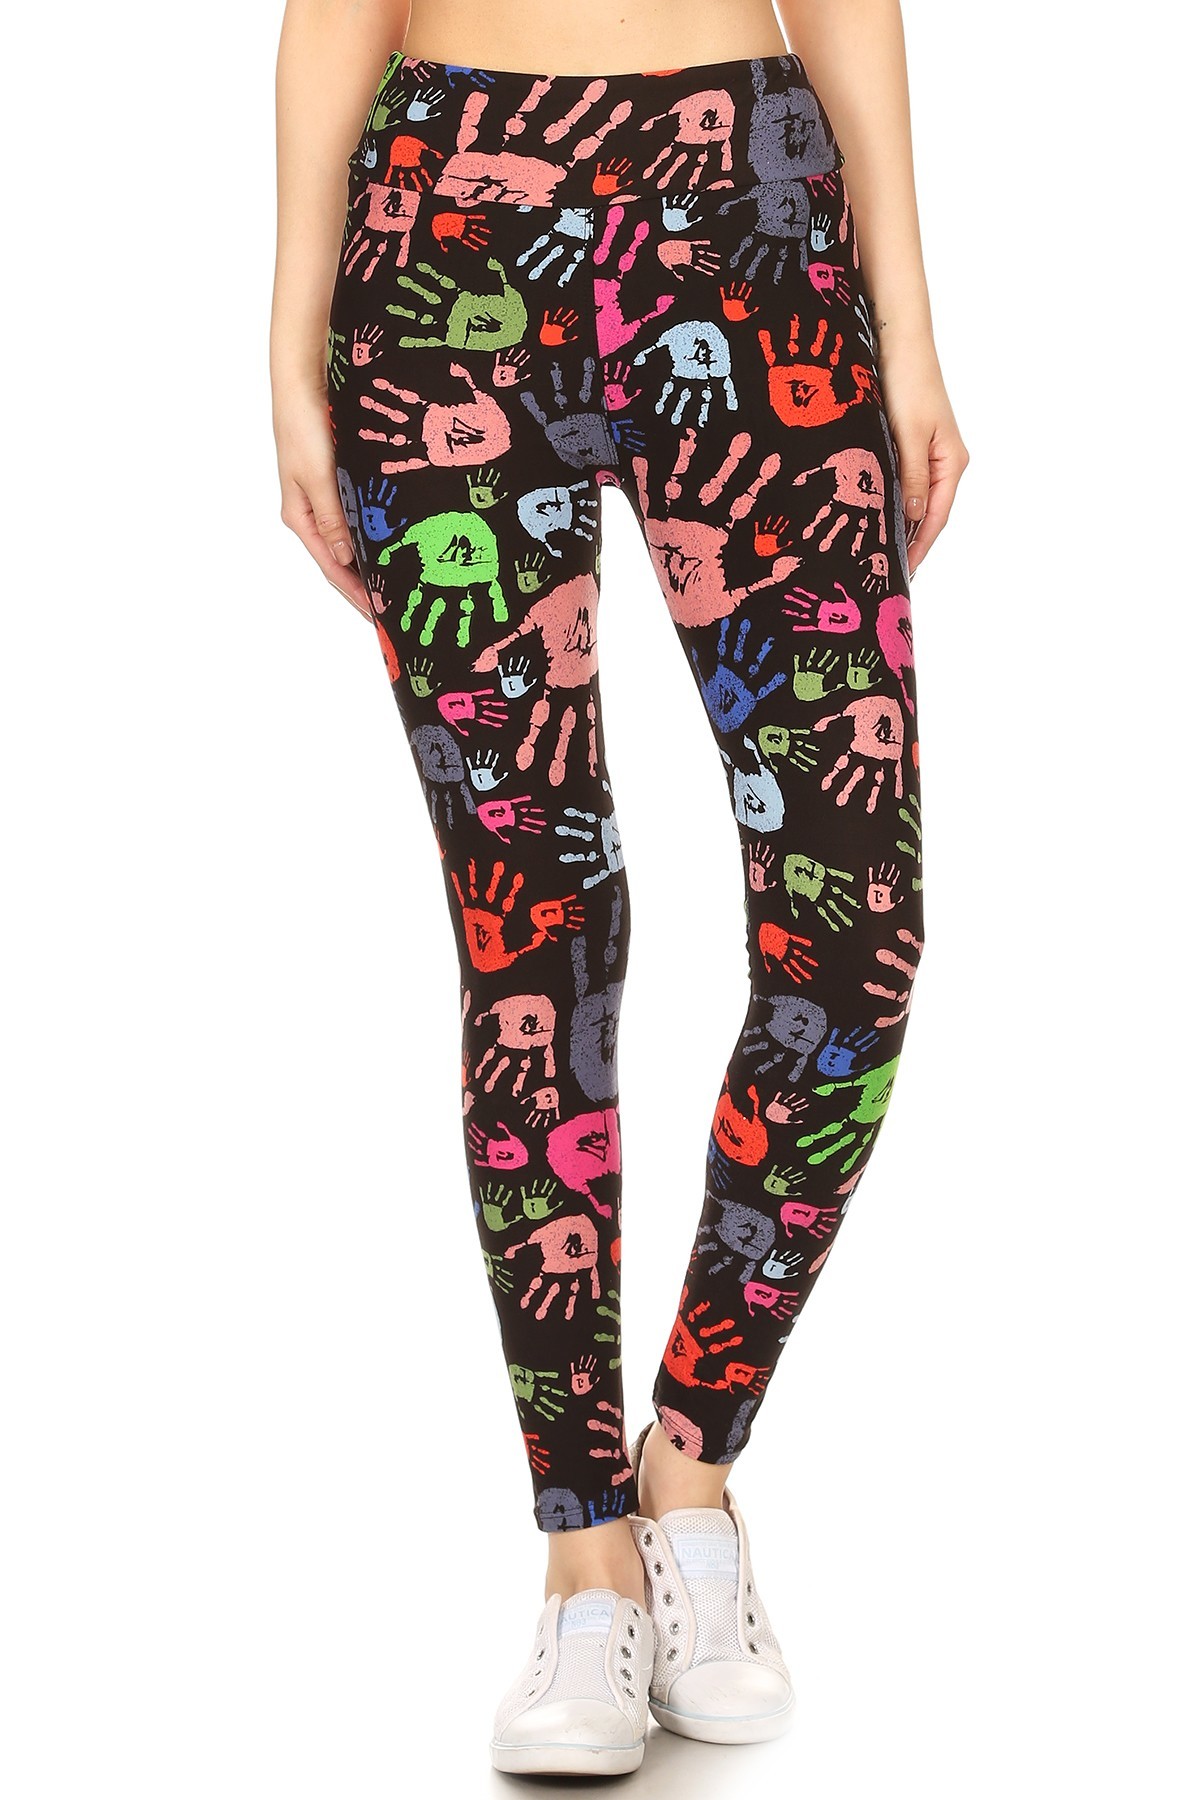 Wholesale Buttery Smooth Colorful Hand Print High Waist Plus Size Leggings